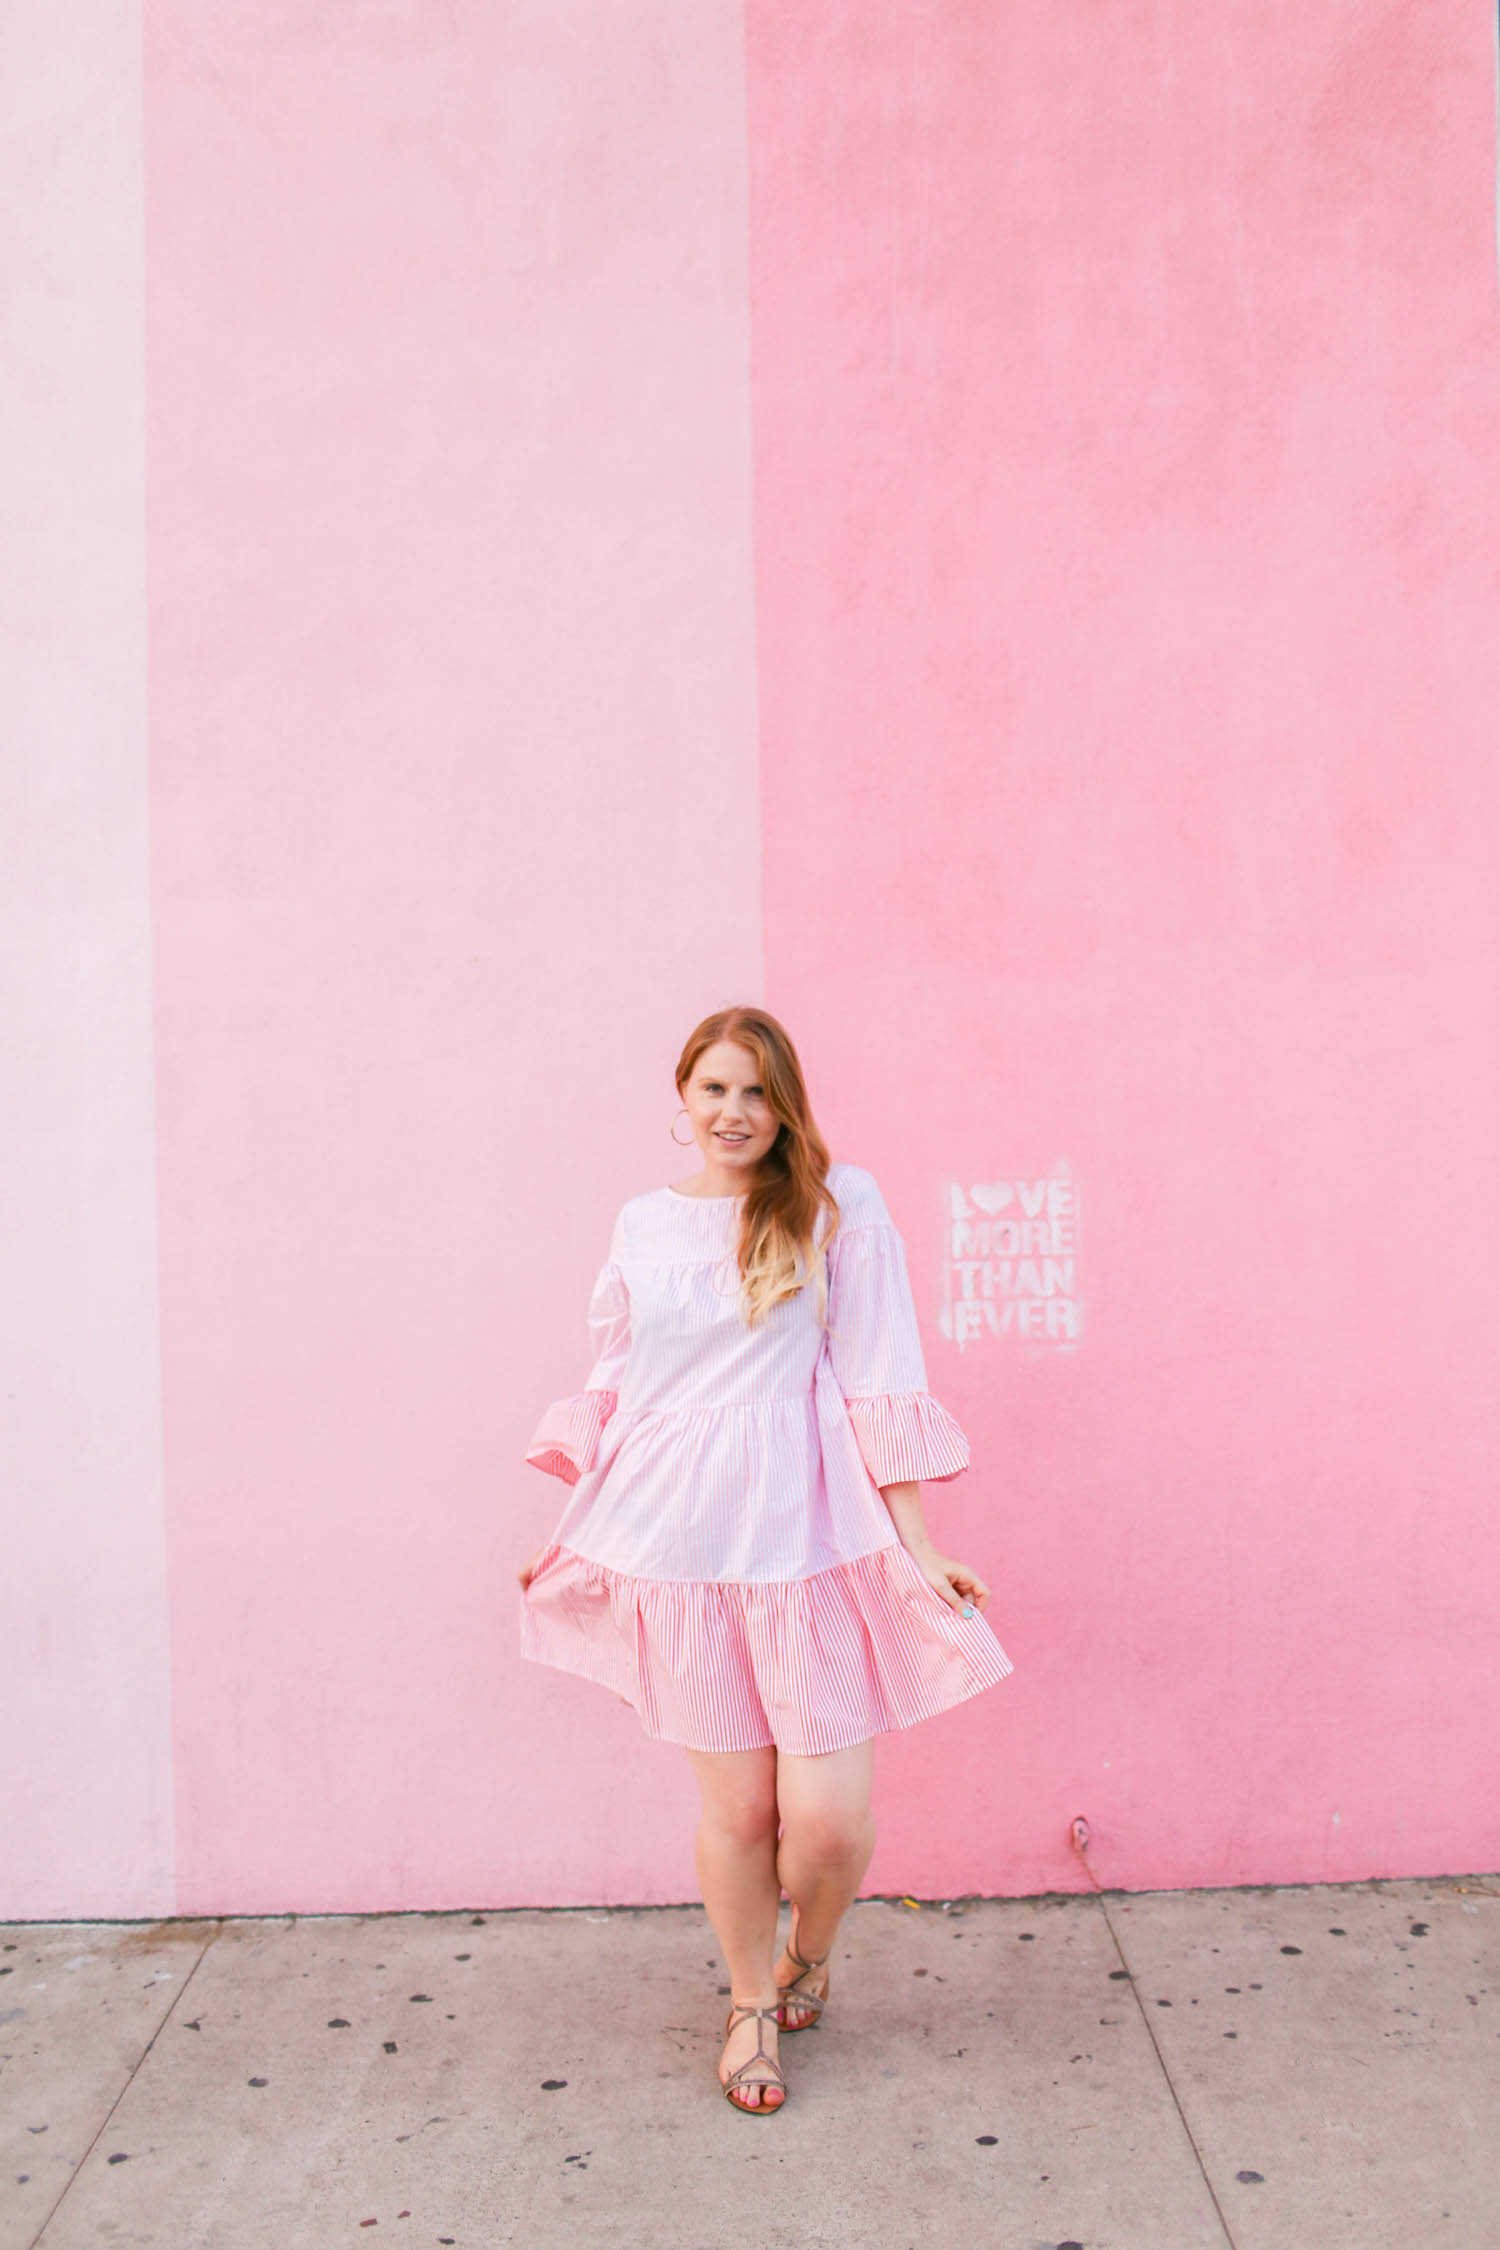 Top 10 Epic 30th Birthday Travel Destinations - The Pigment Boutique Pink Wall in North Park in San Diego.